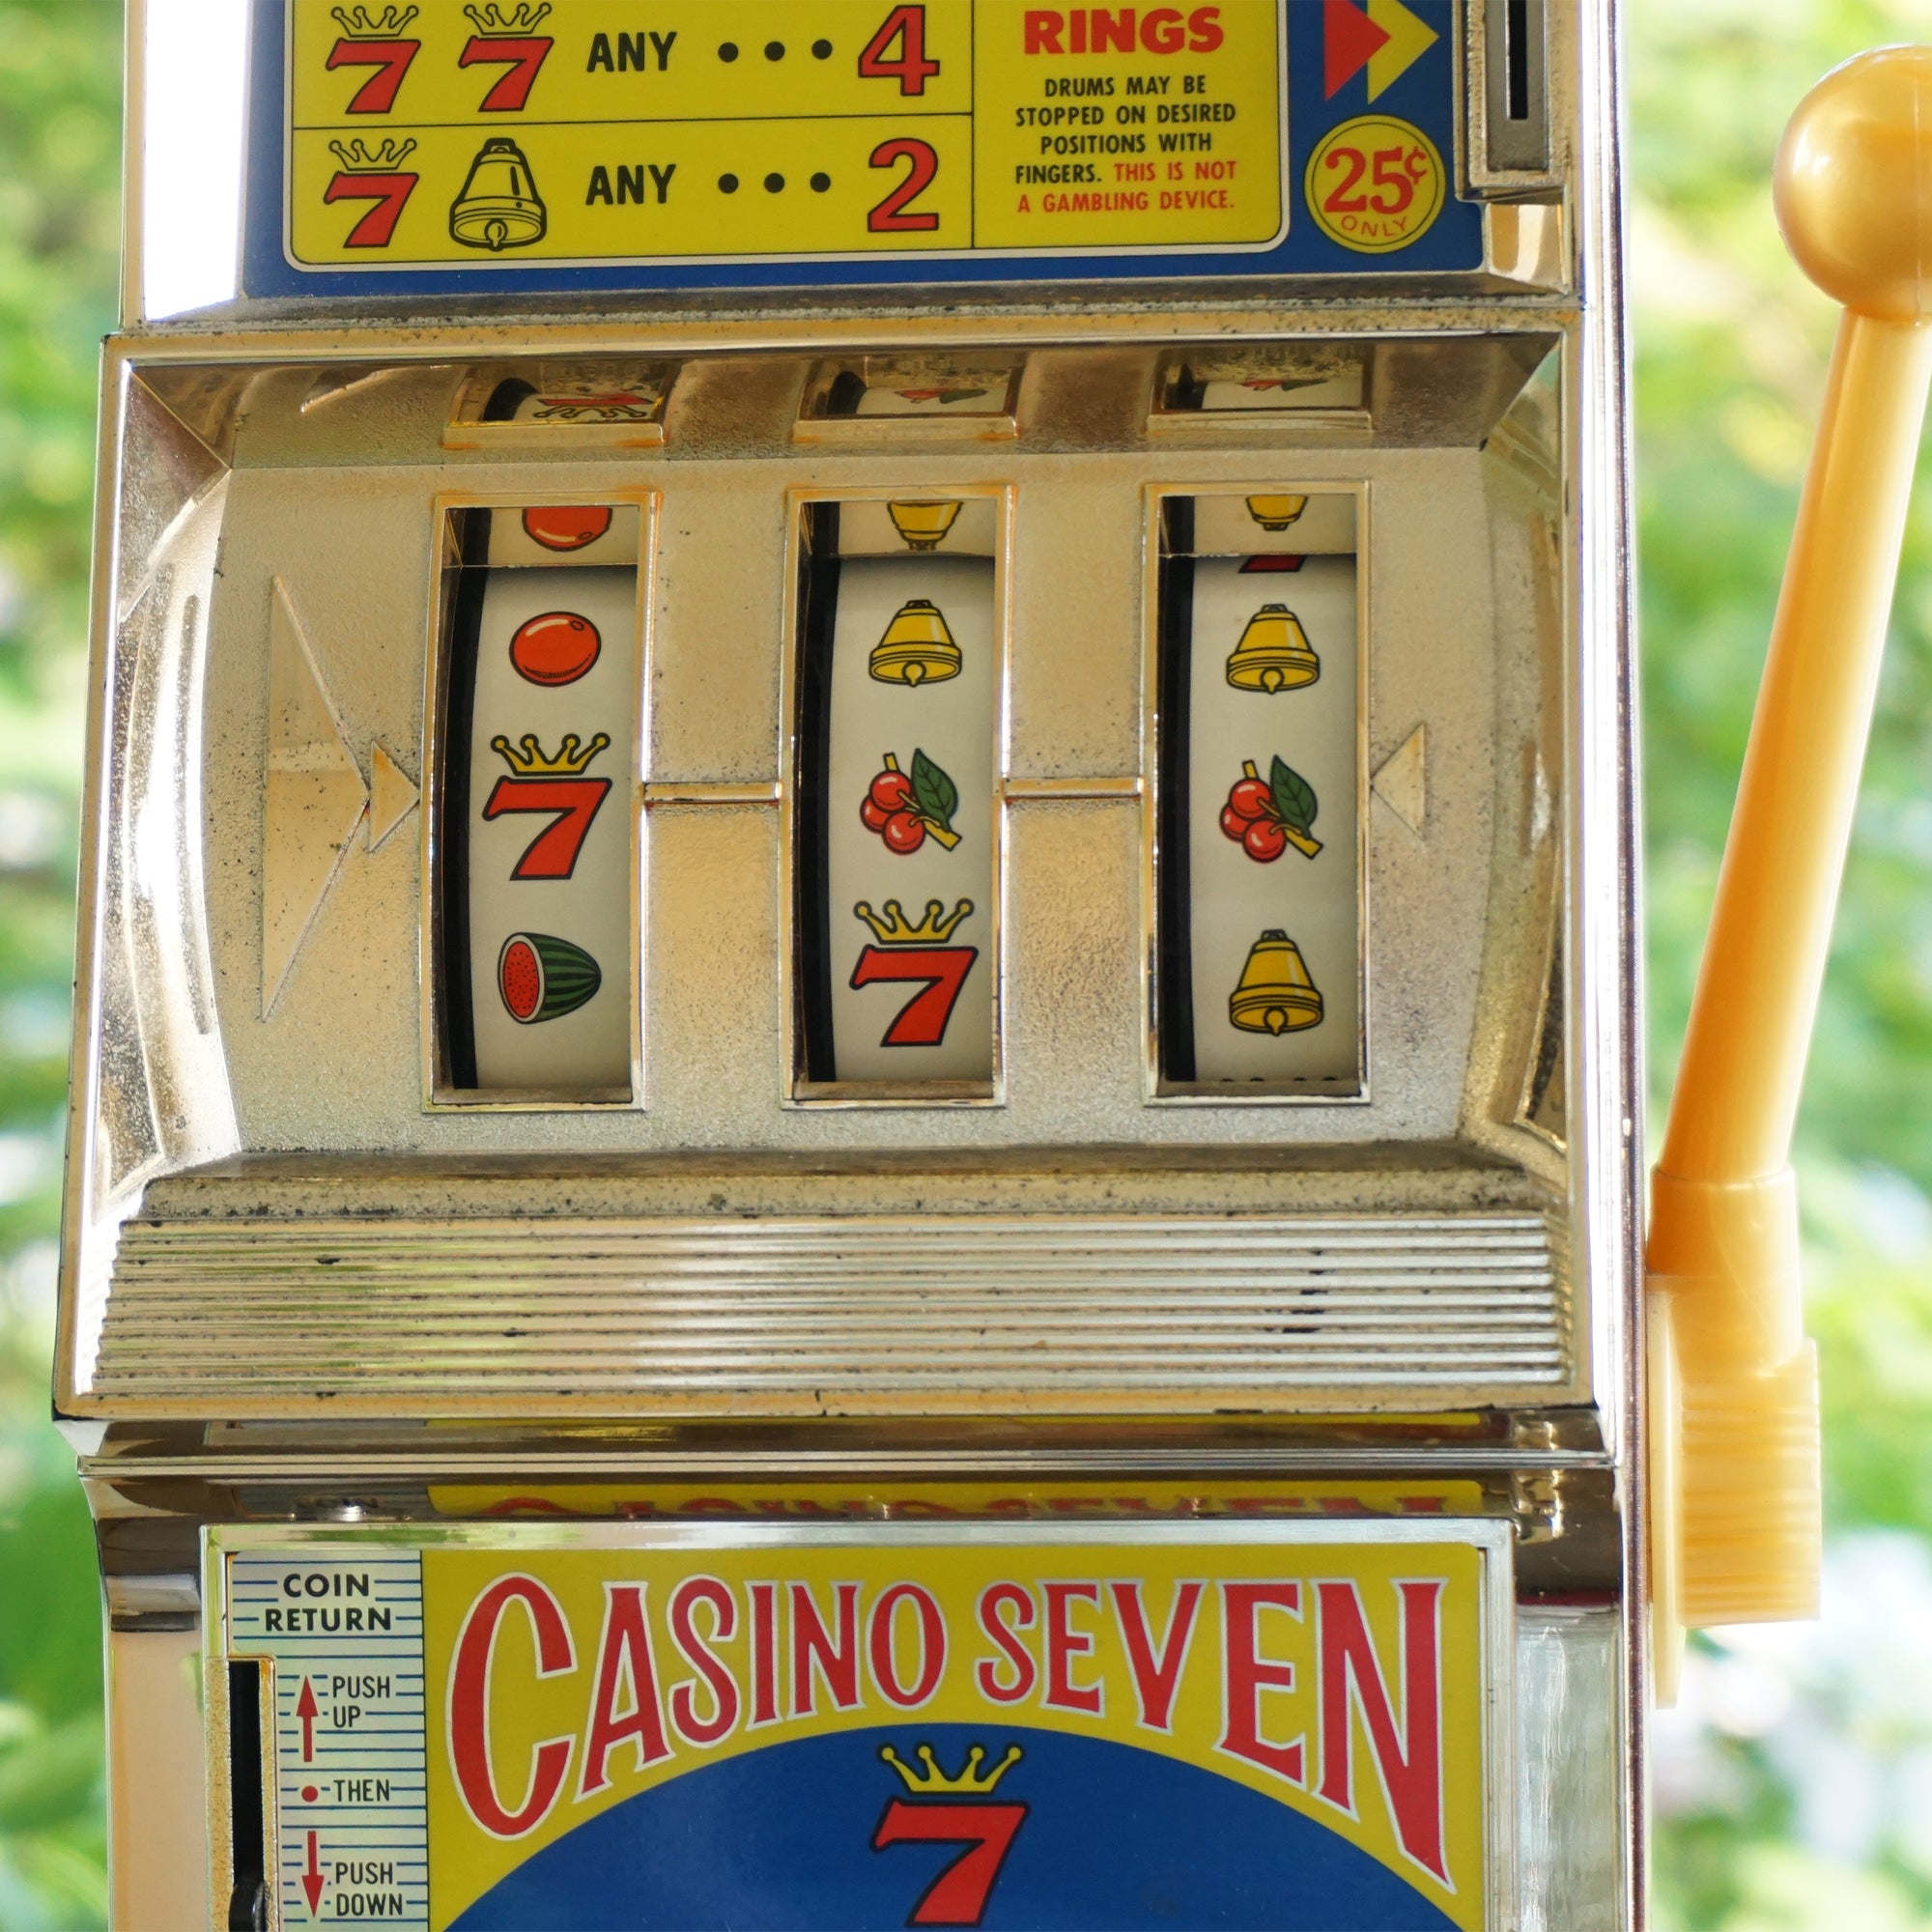 Vintage WACO Jackpot Casino Seven Real Action Slot Machine. Coin or Play Free. Made in Japan.